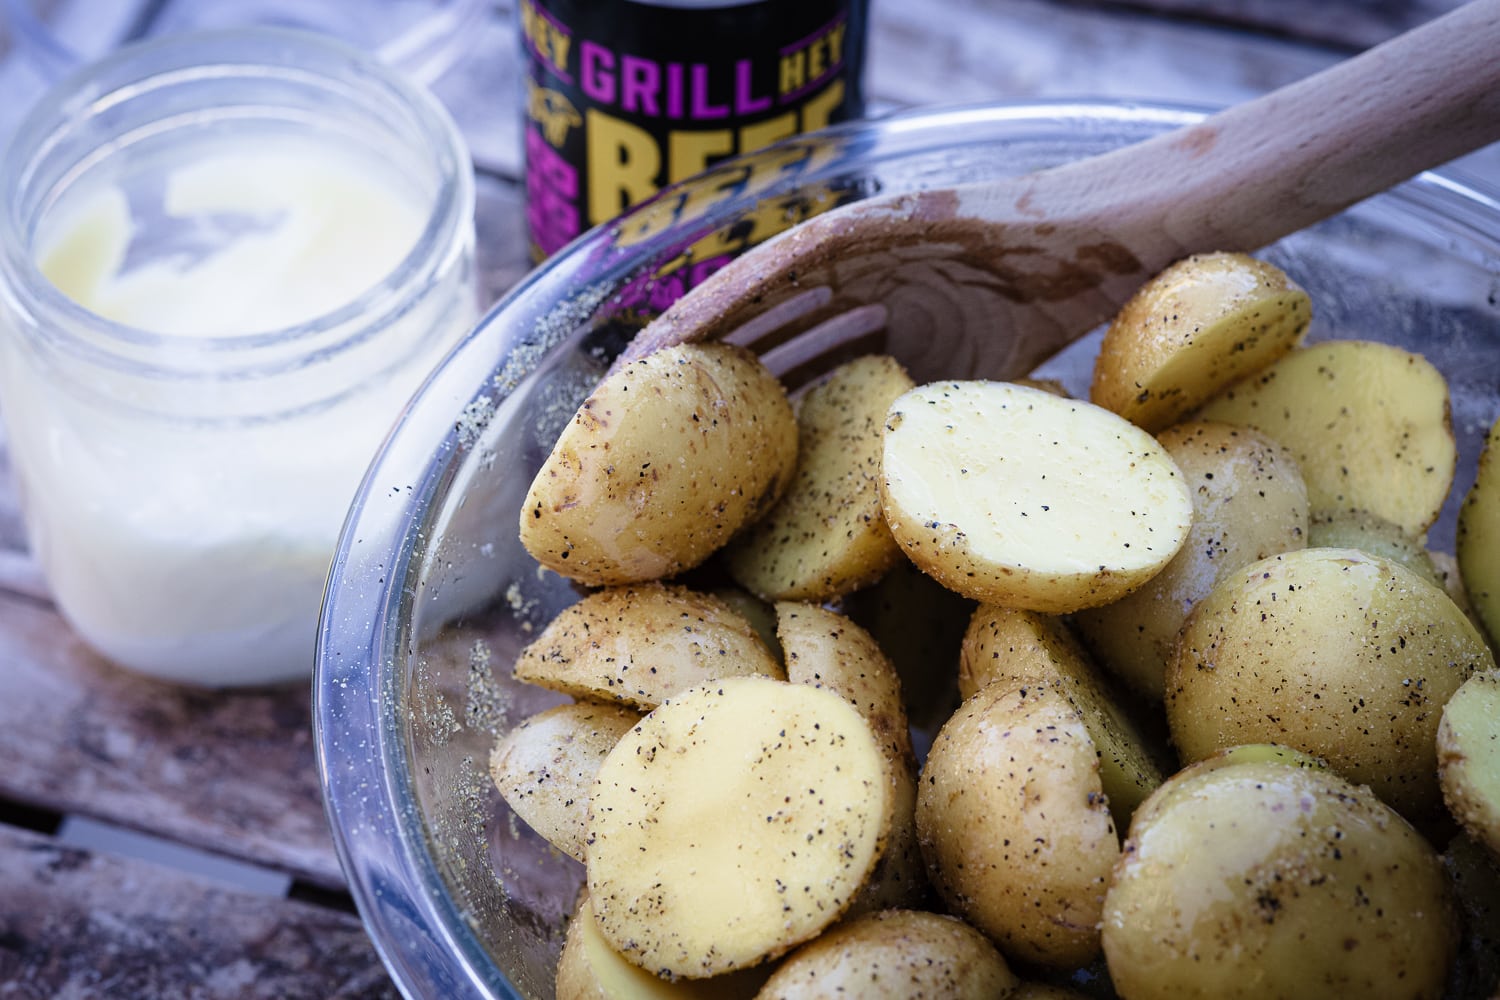 Baby potatoes being seasoned with Hey Grill Hey Beef Rub in a glass bowl.